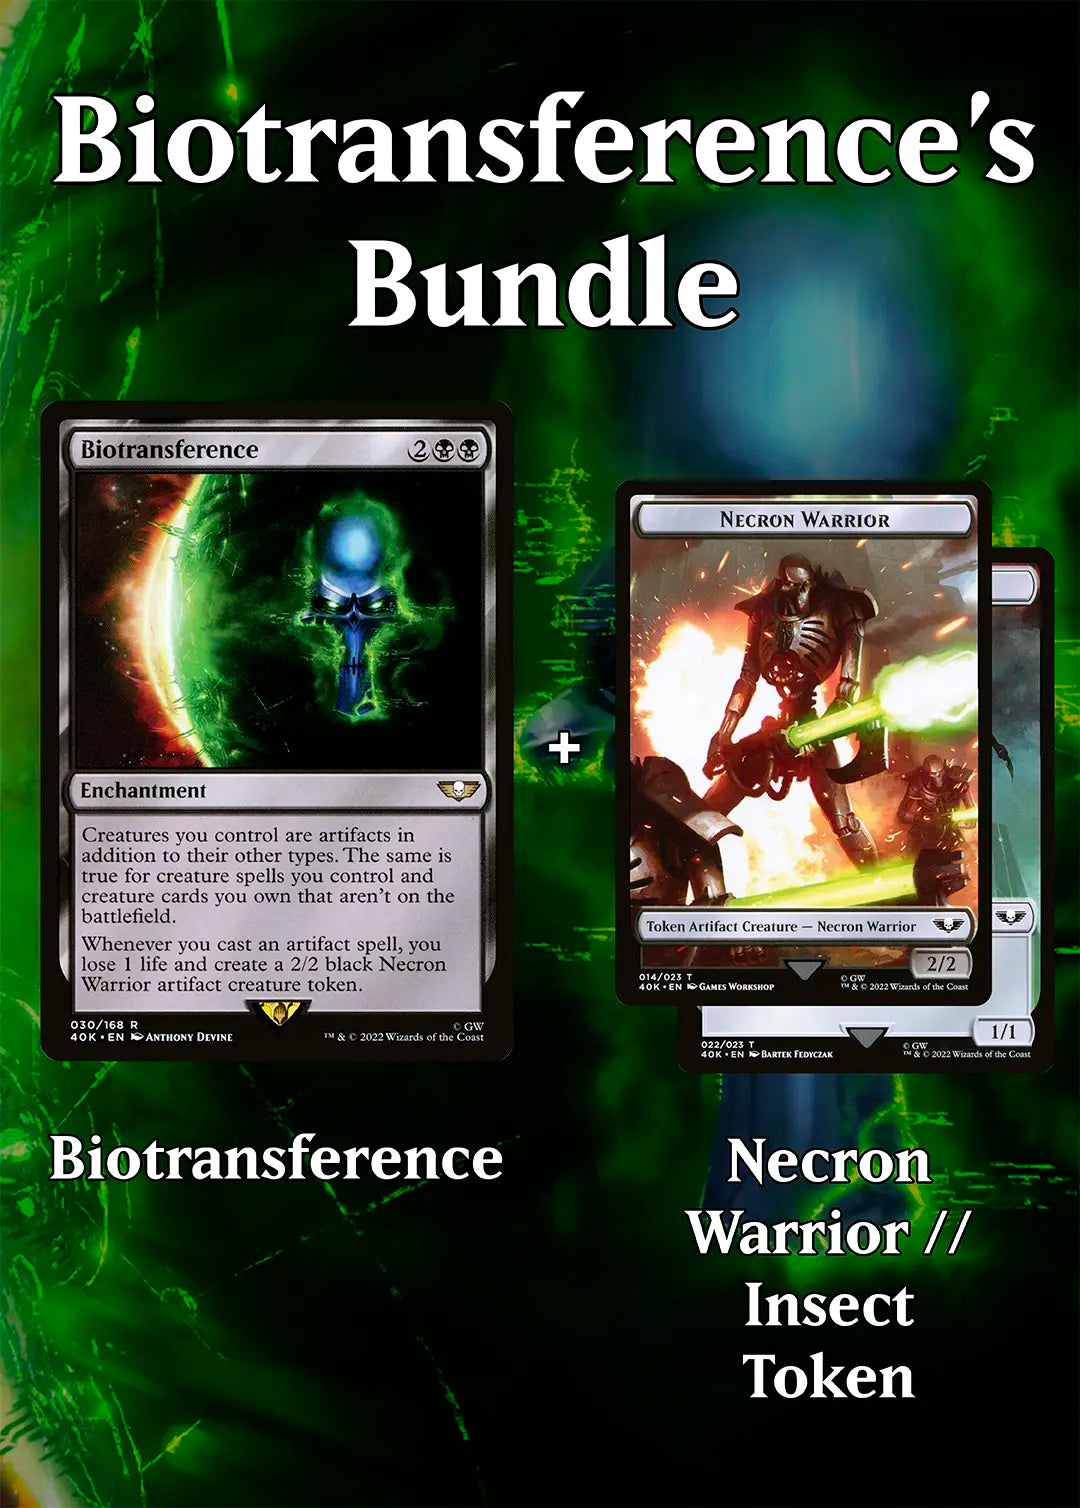 Biotransference's Bundle - Necron Warrior Insect Token